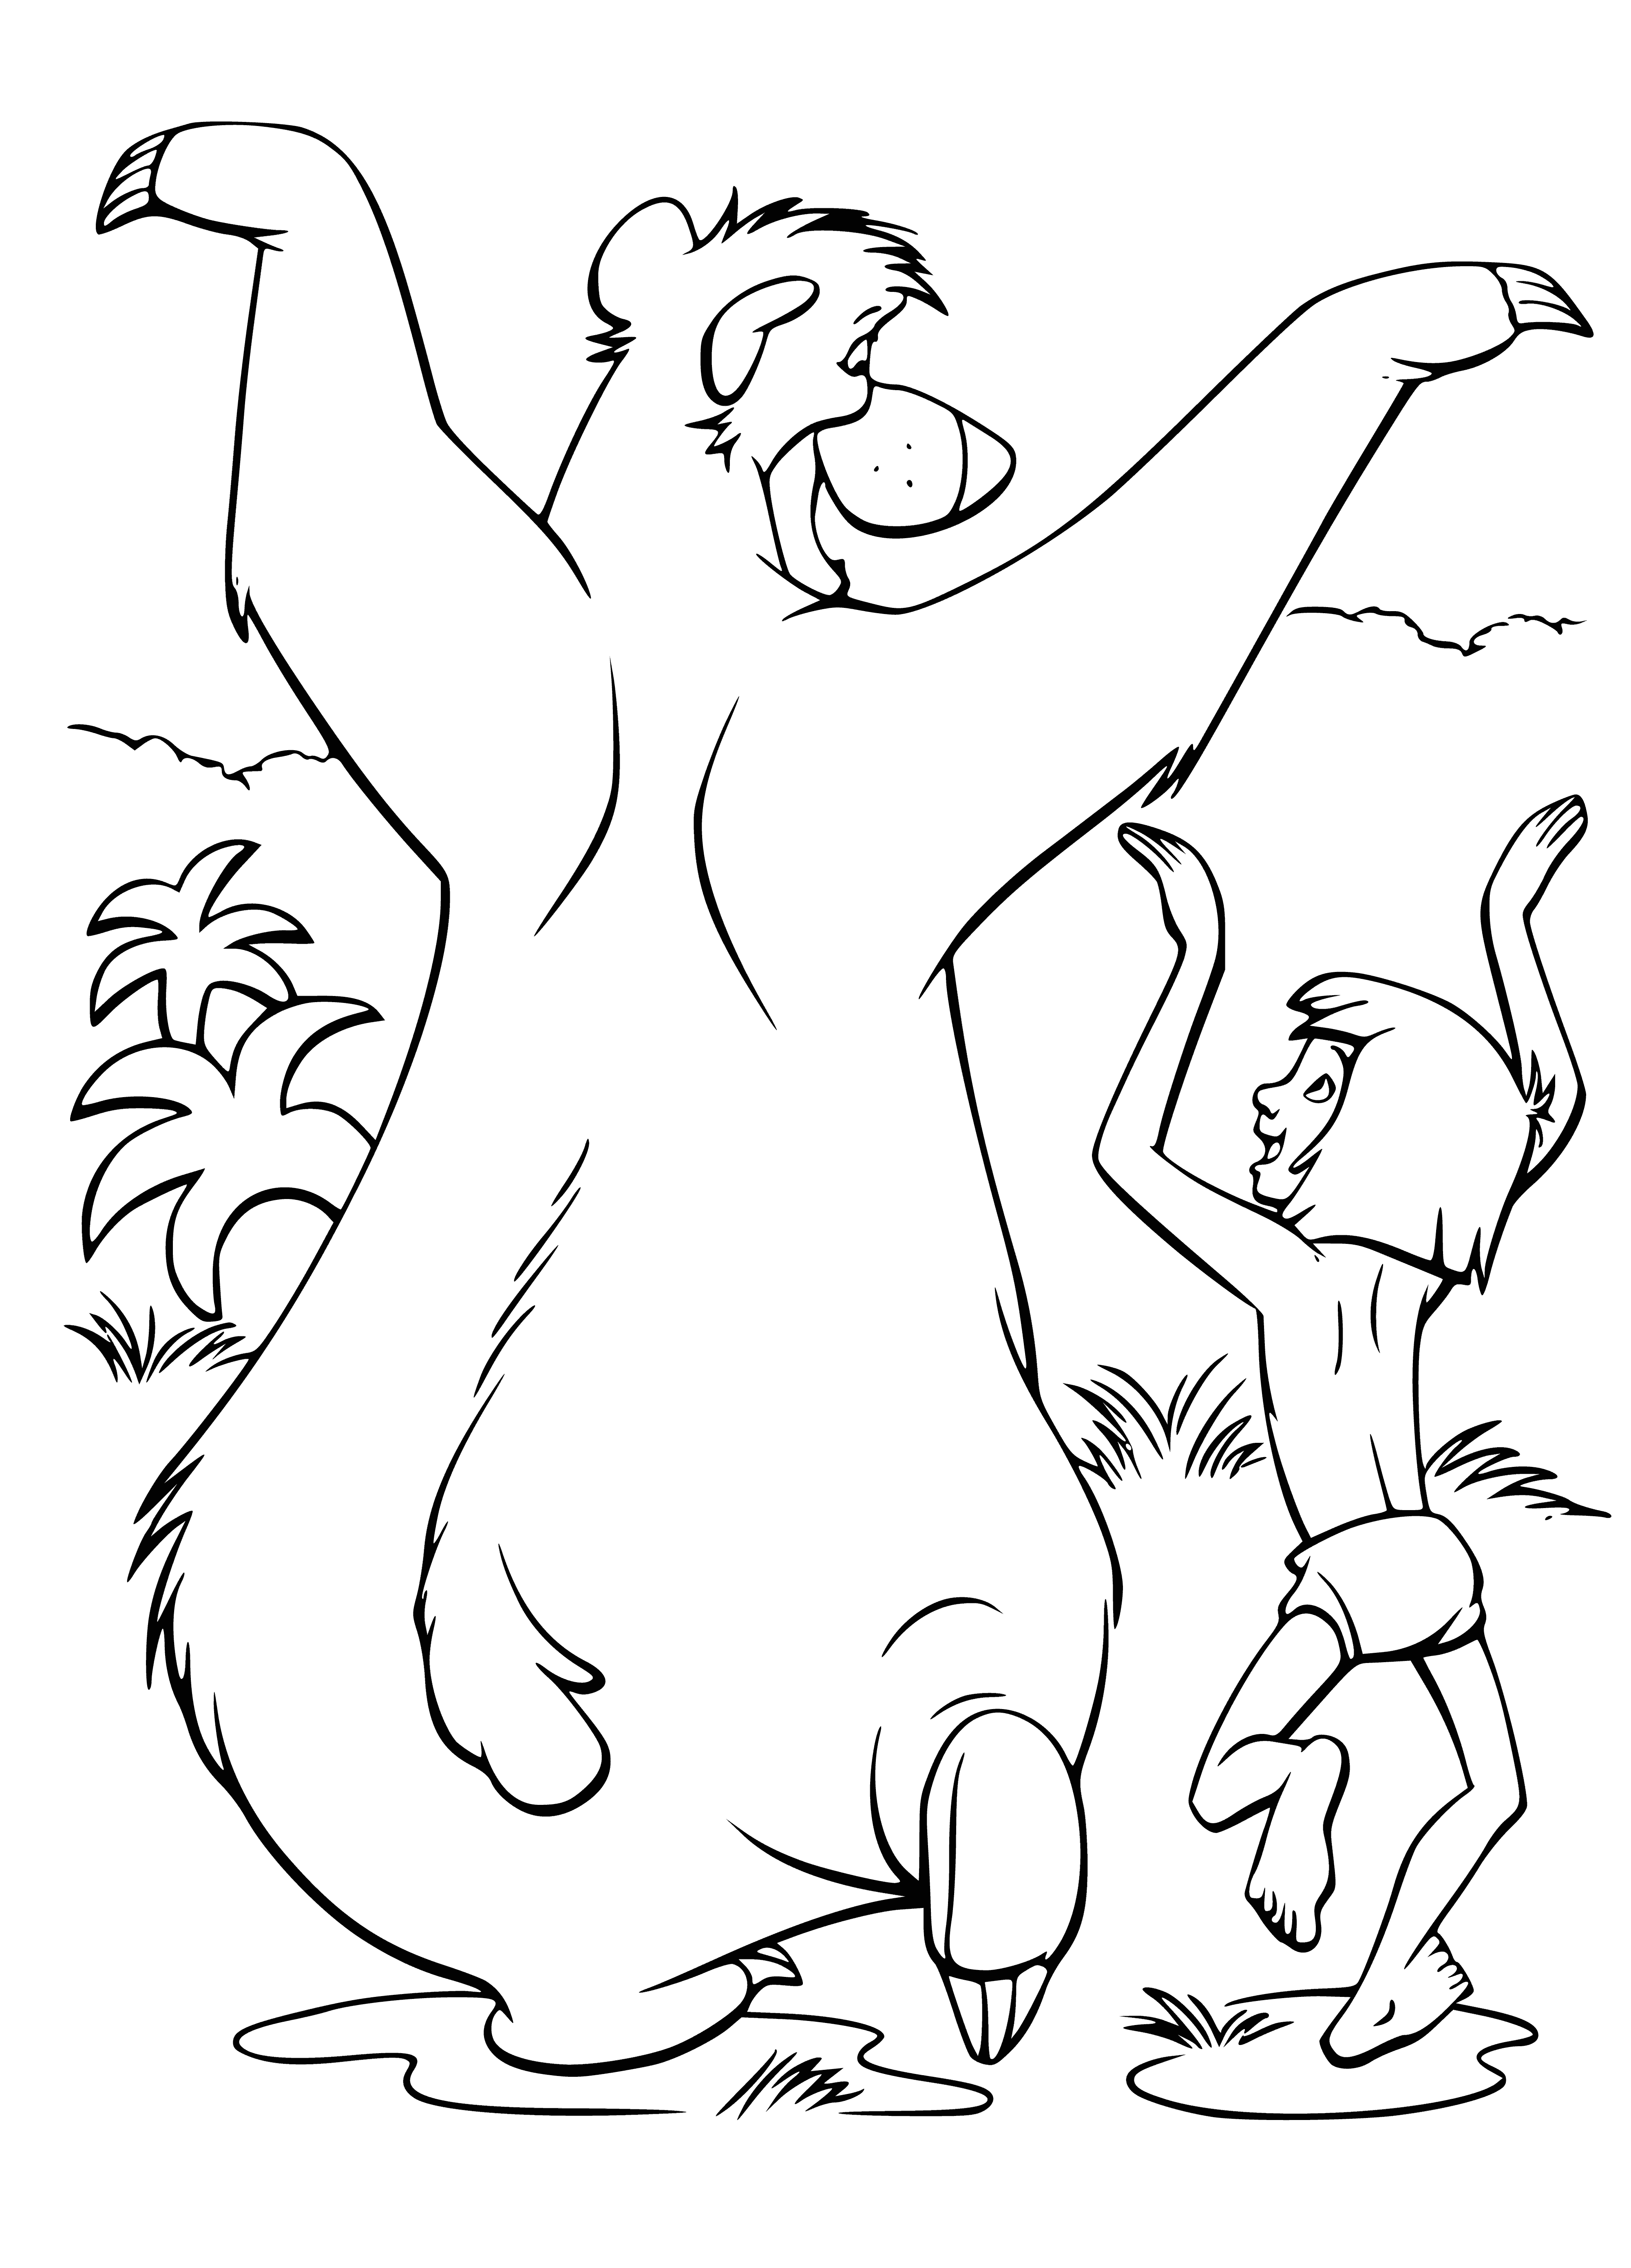 coloring page: Boy and bear share a joyous moment in jungle clearing; bear belly protruding and mouth open in friendly grin, boy bare-chested, delighted and triumphant.